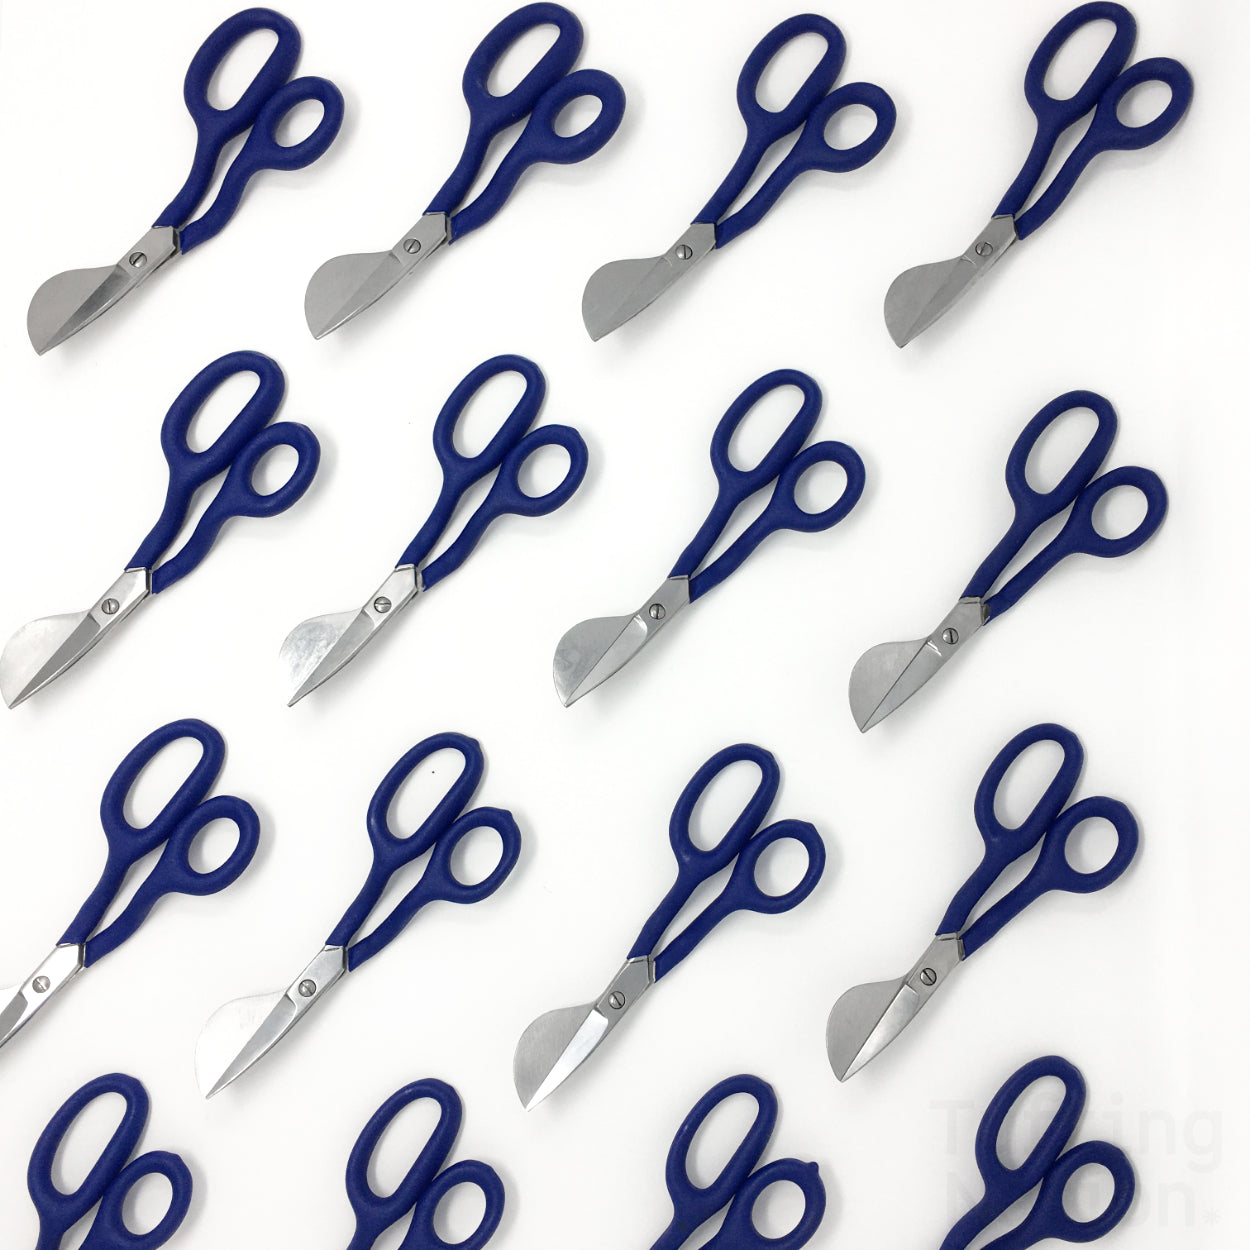 Duckbill Scissors for Trimming the Pile and Edges of Tufted  Rugs. |  TuftingNation Canada